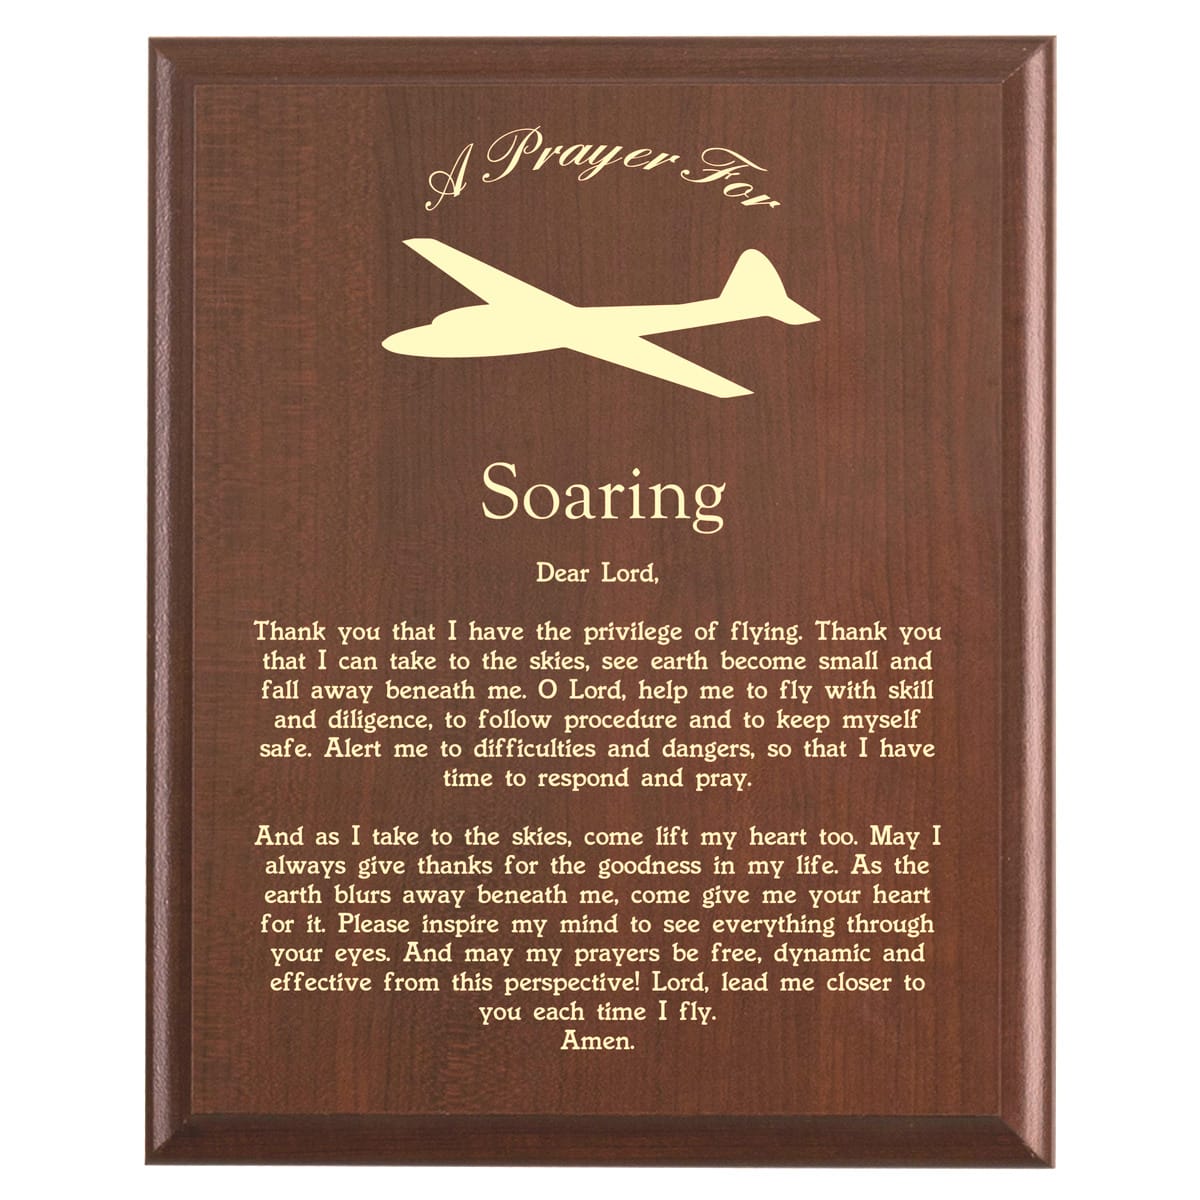 Plaque photo: Soaring Prayer Plaque design with free personalization. Wood style finish with customized text.